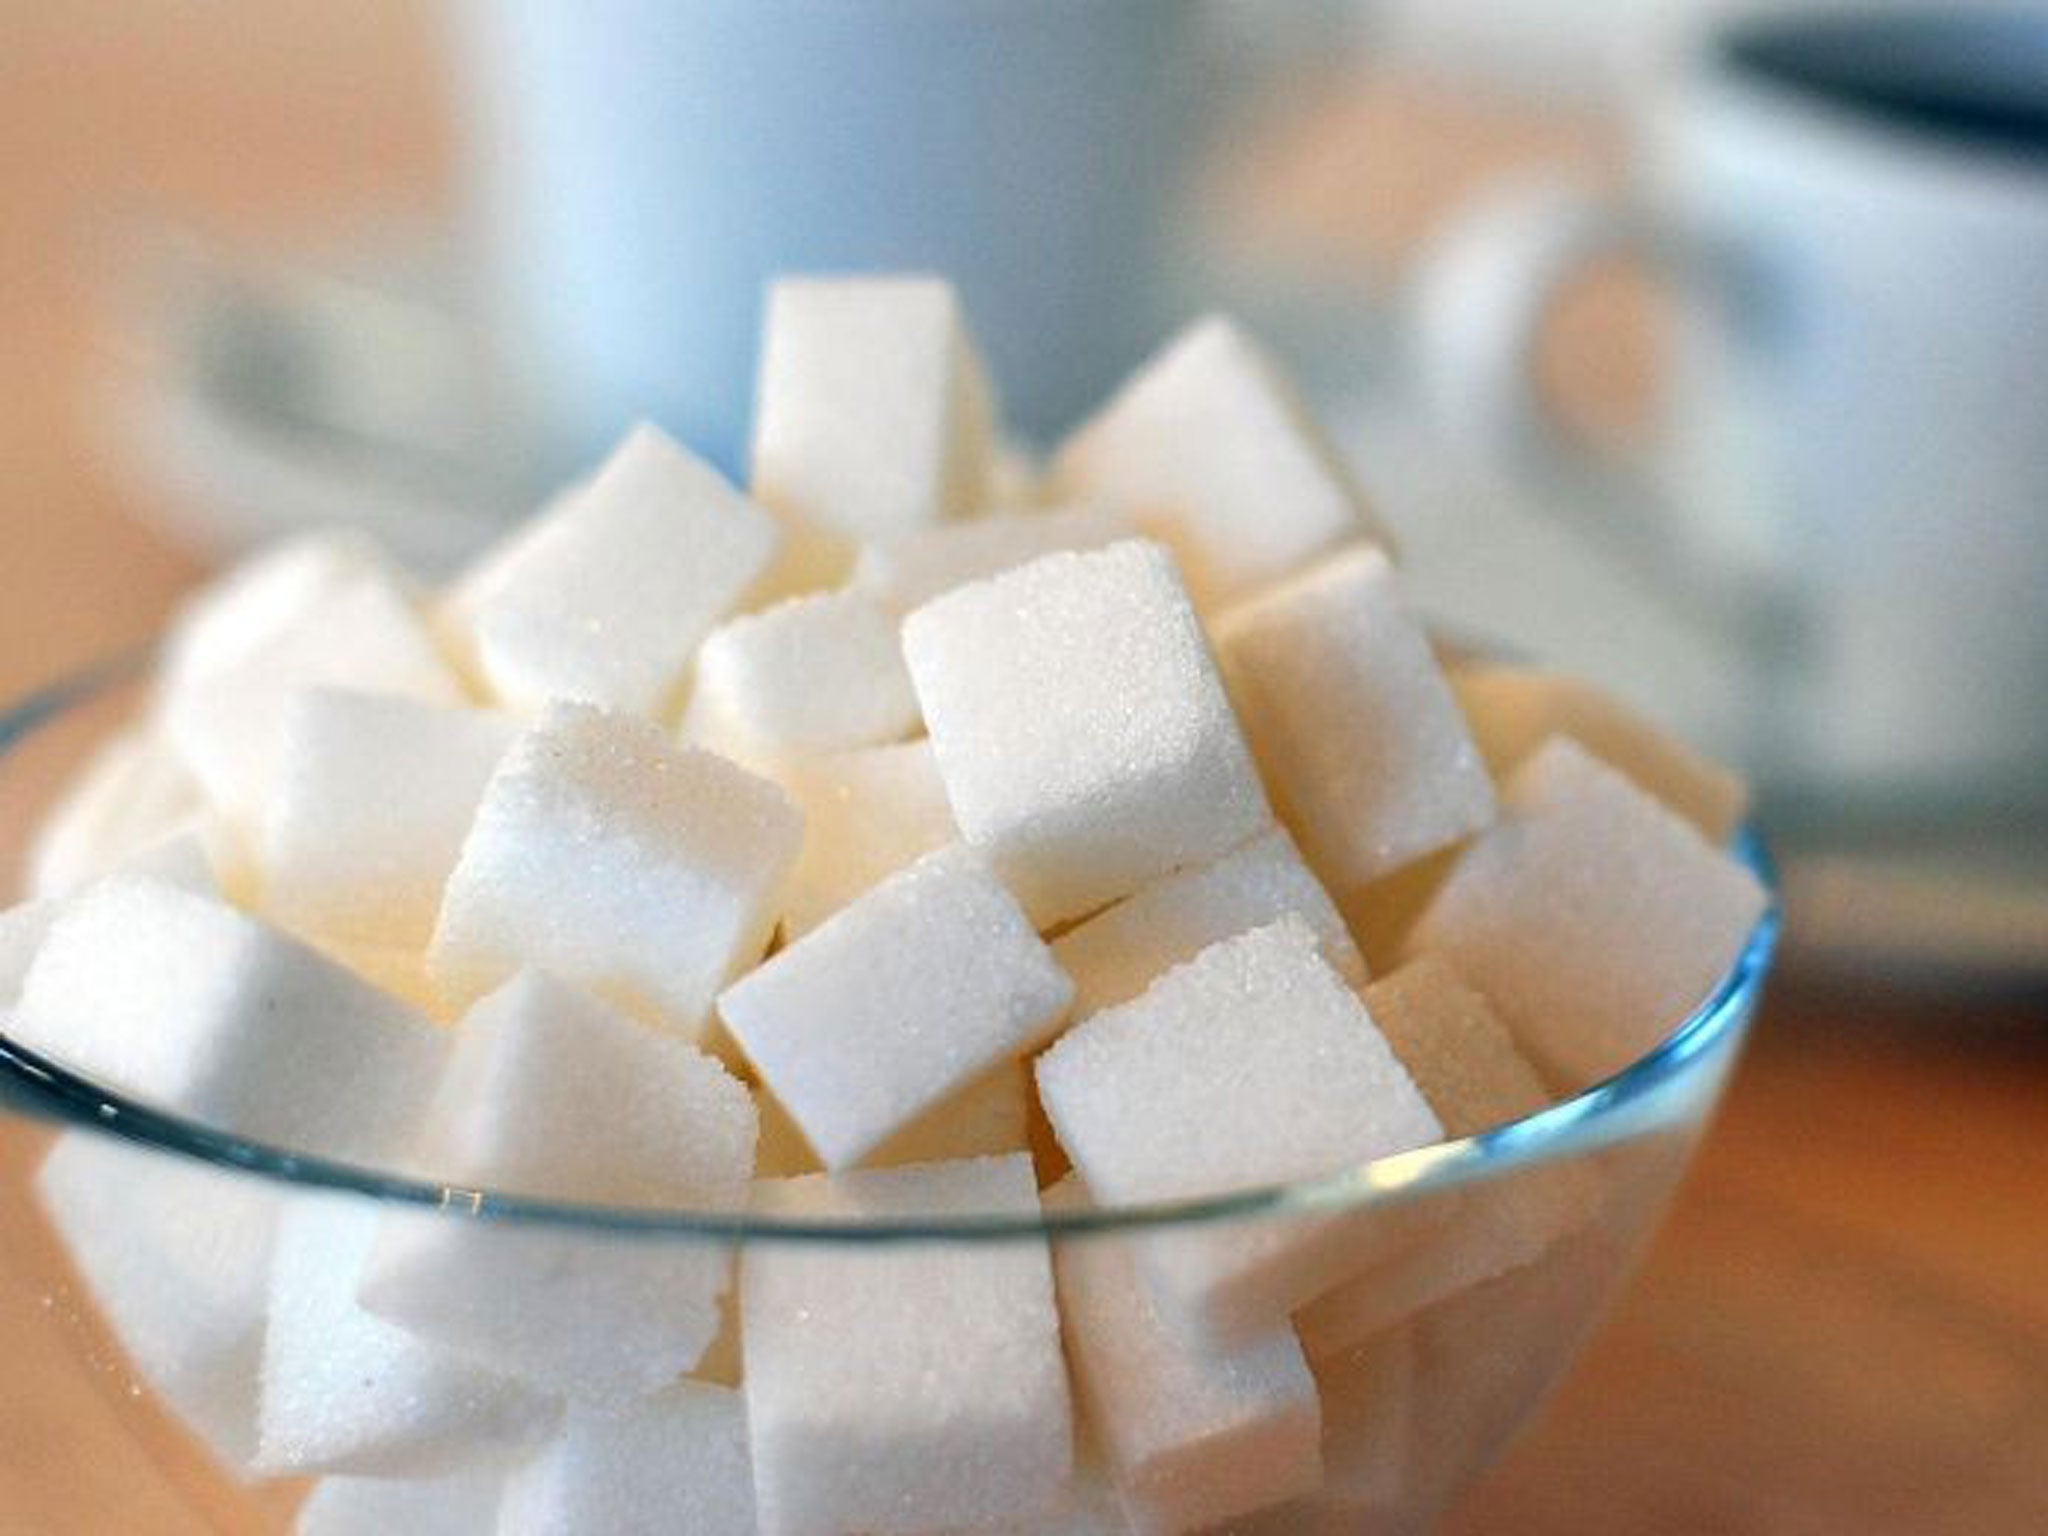 Sugar is one of the most addictive substances